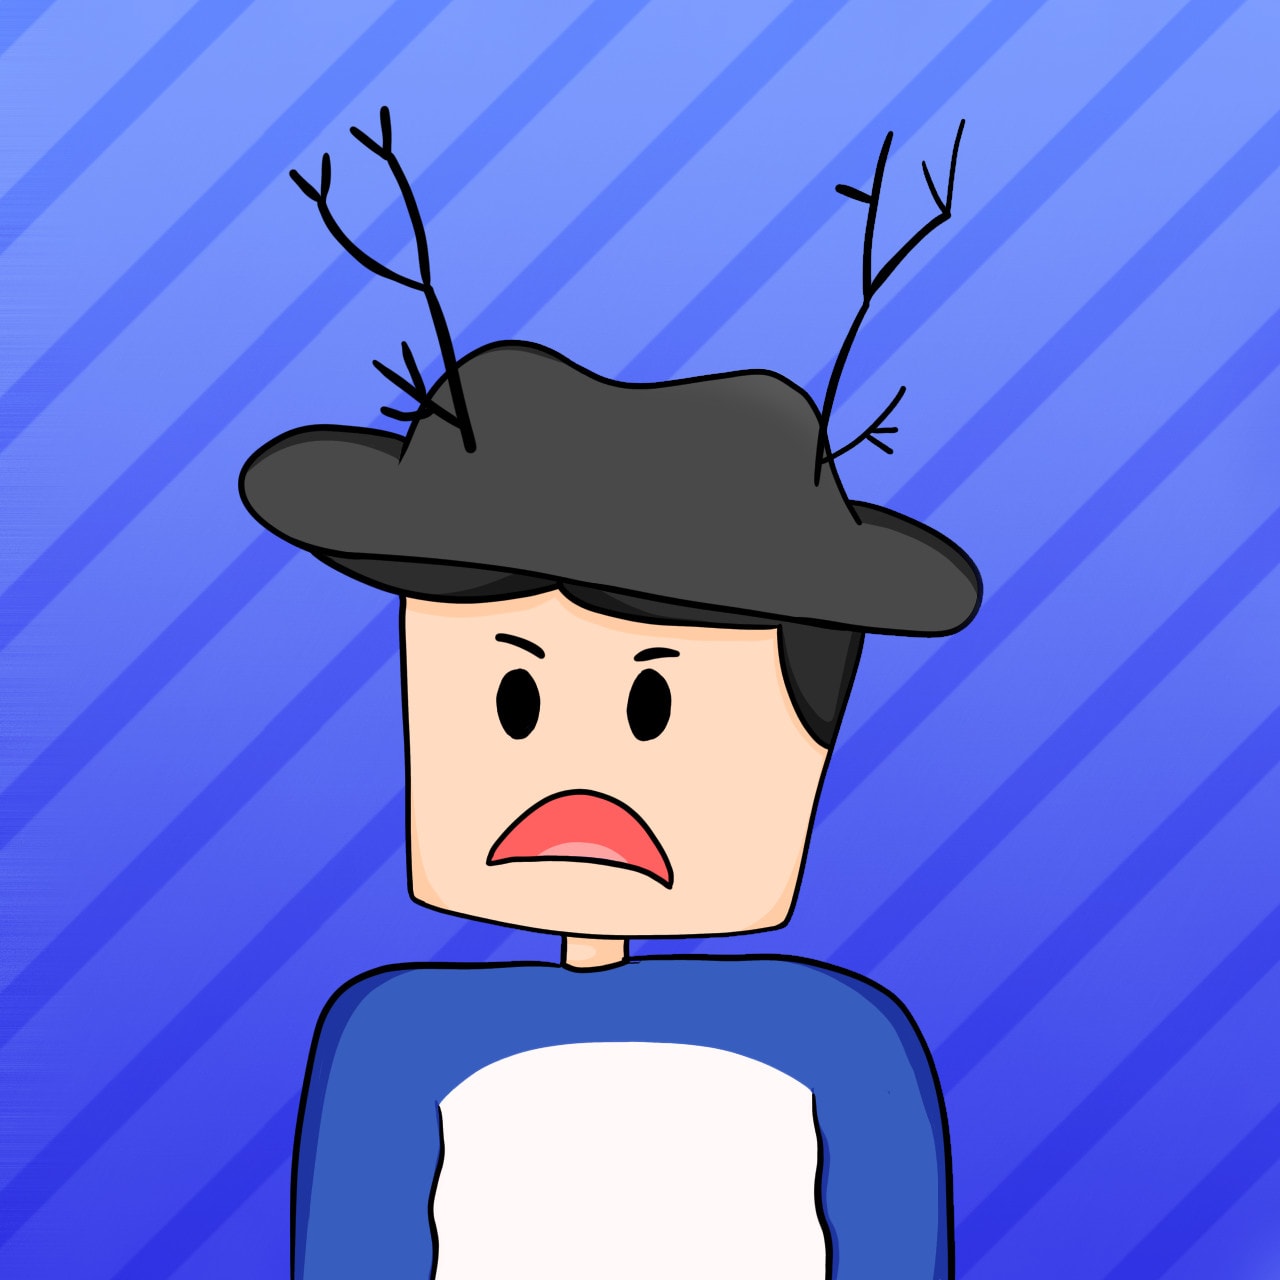 Draw Your Roblox Avatar By Snxwyt - roblox youtube drawing avatar png clipart art avatar character